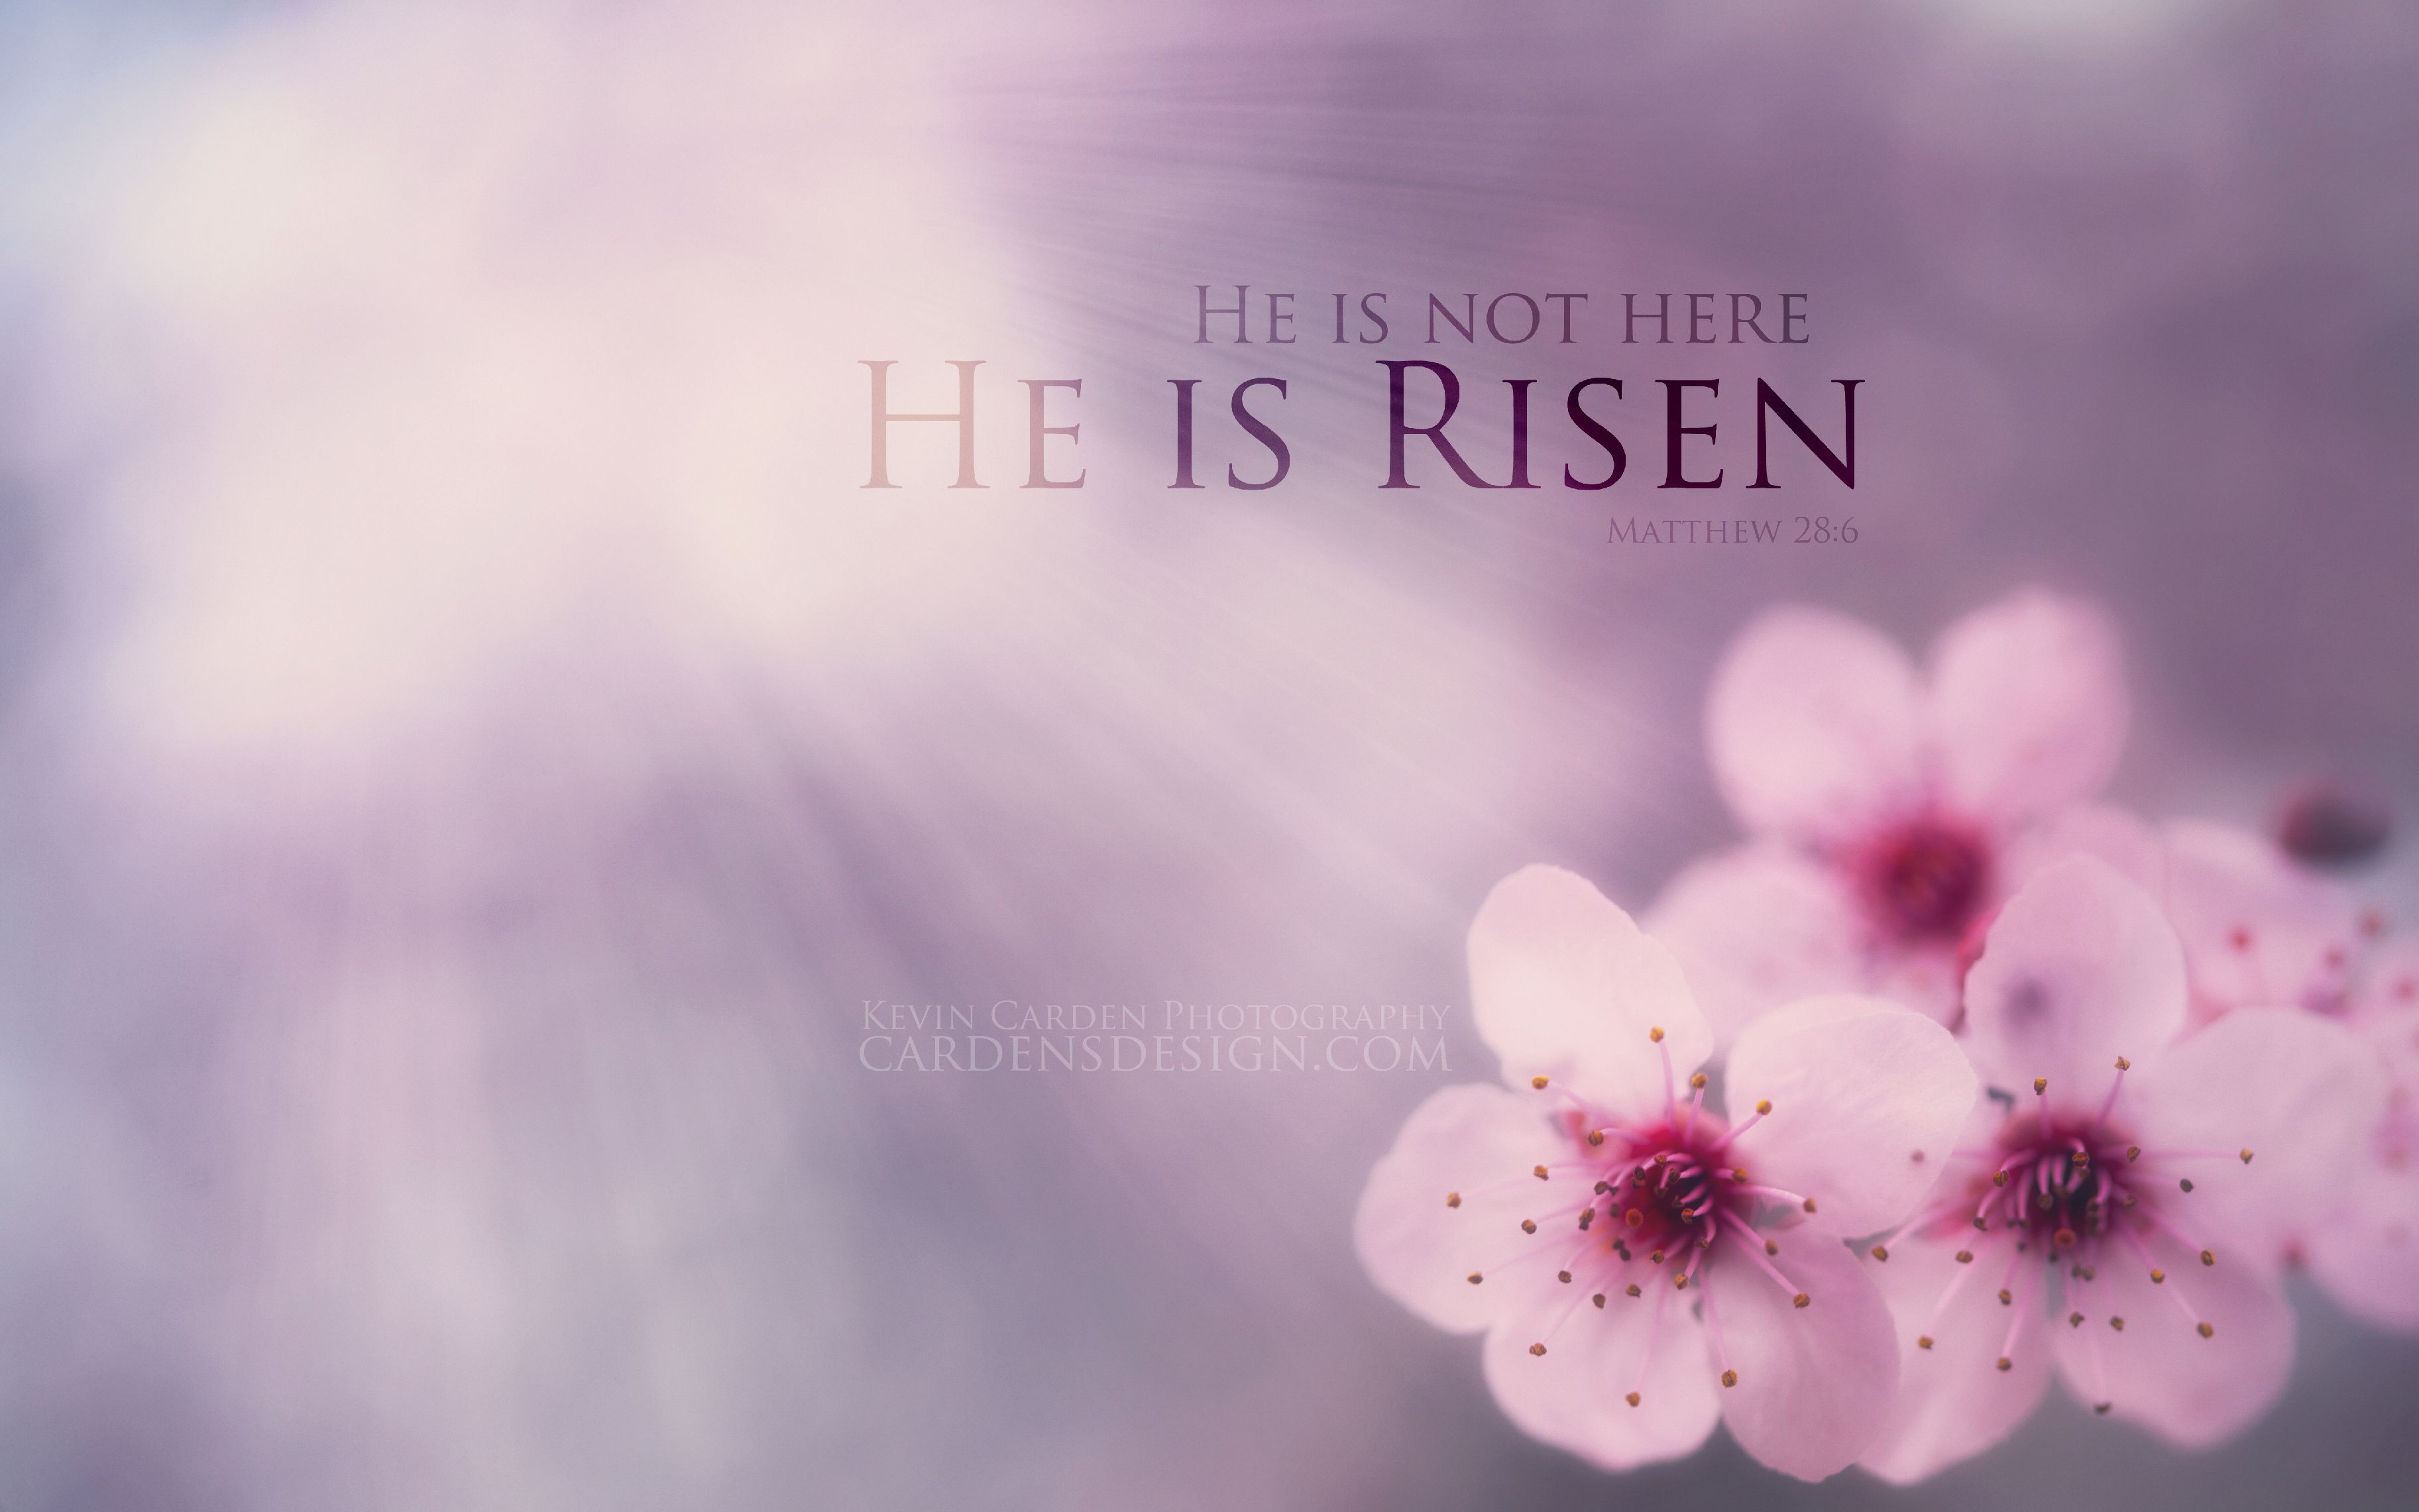 Free download He is risen beautiful wallpaper With Resolutions 36502282 Pixel [3650x2282] for your Desktop, Mobile & Tablet. Explore Christian Easter Picture Wallpaper. Free Christian Easter Wallpaper, Easter Picture